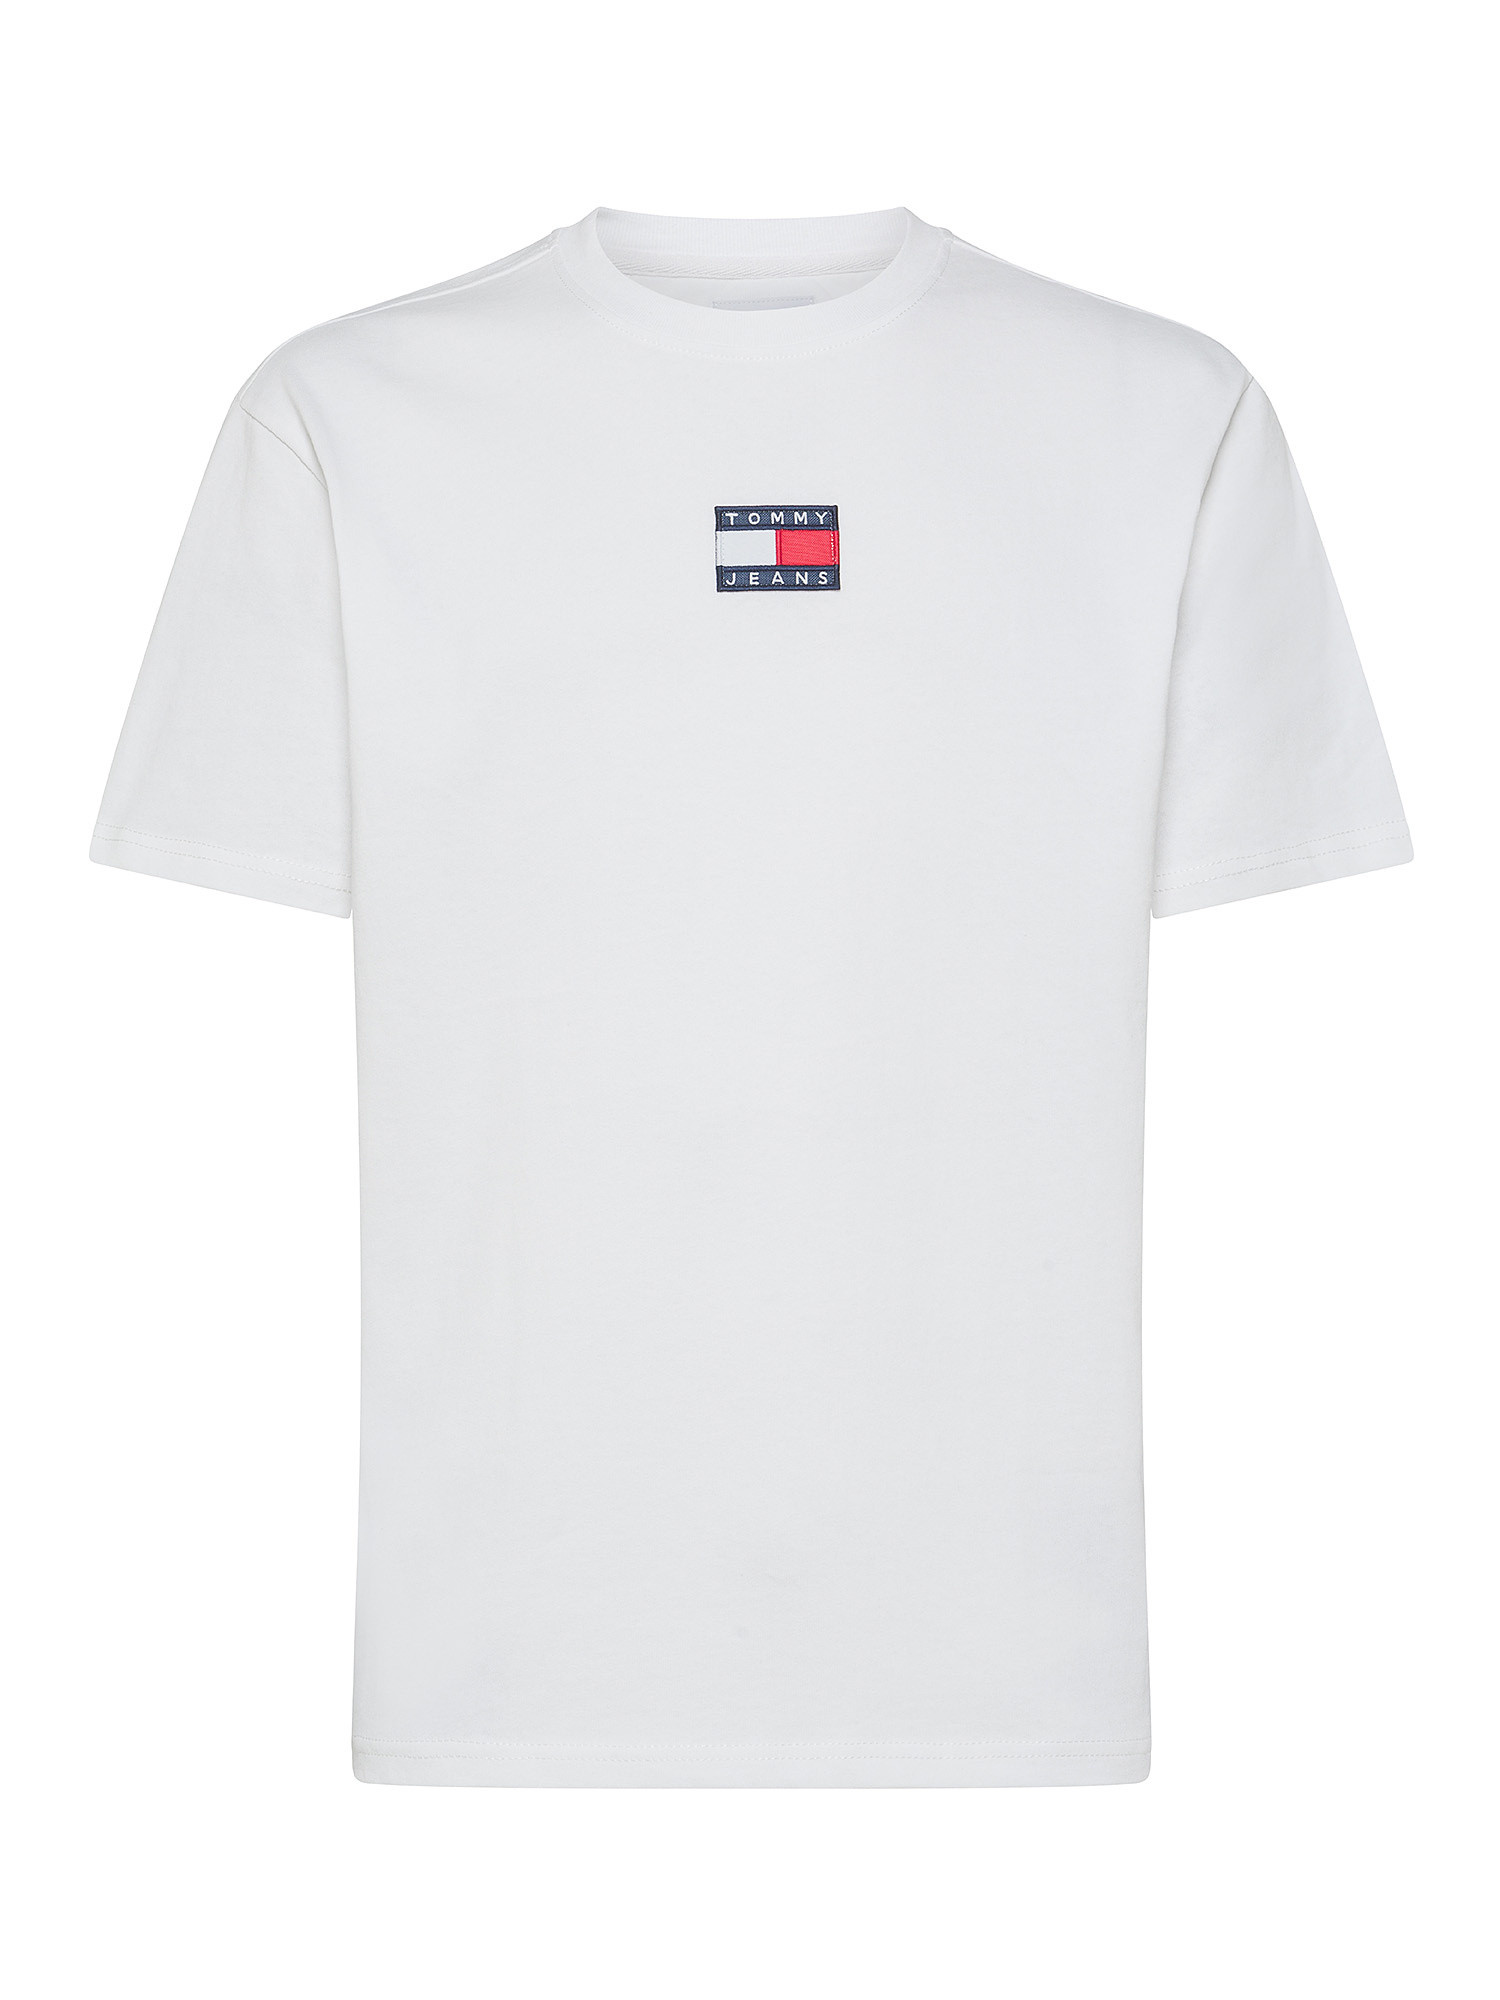 Tommy Jeans - Cotton crewneck T-shirt with micrologo, White, large image number 0